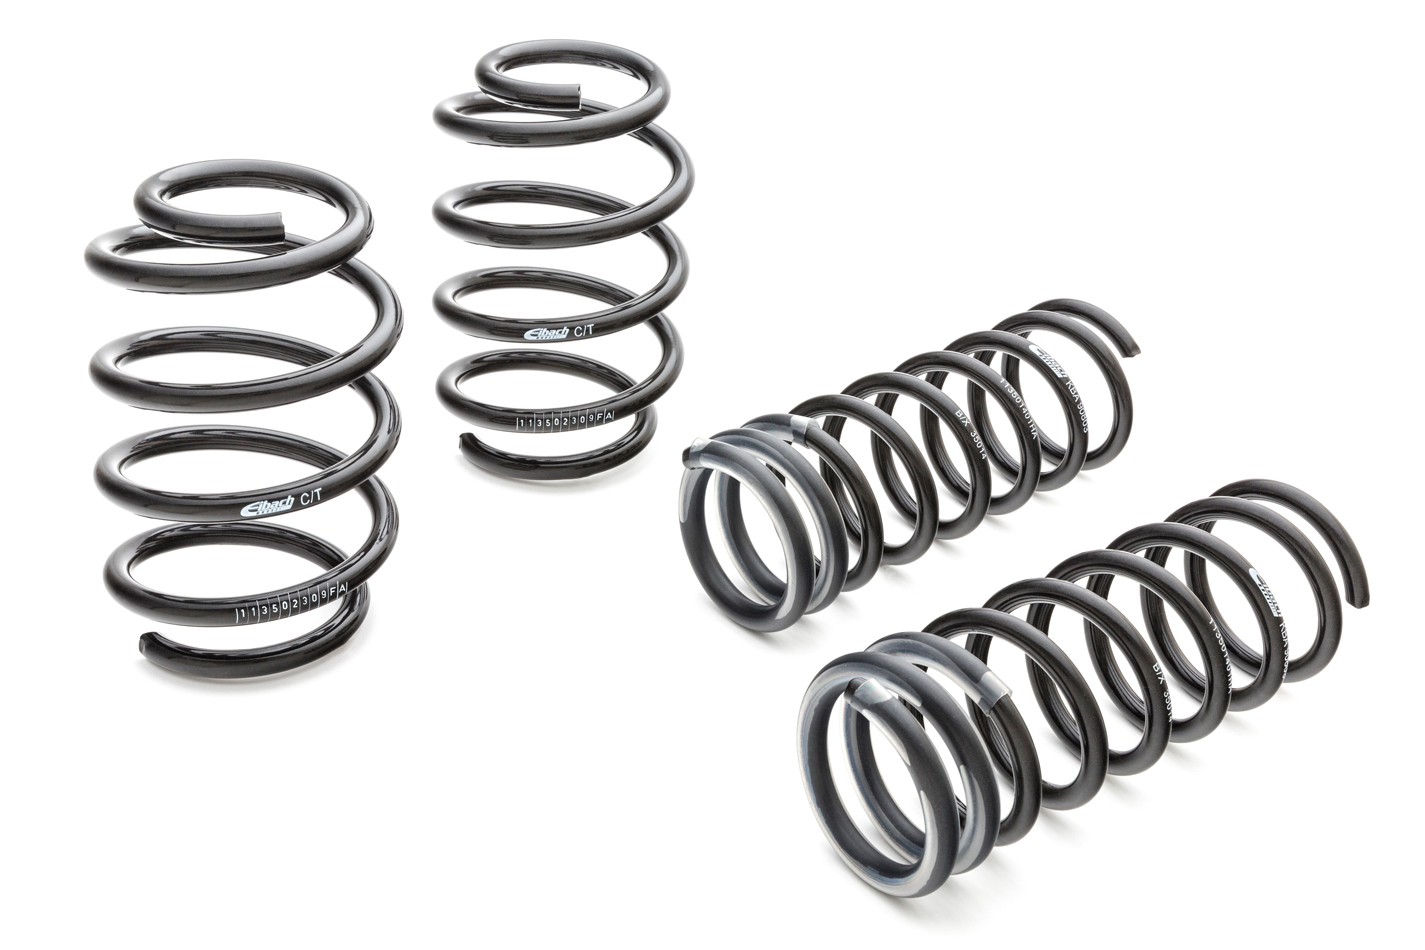 Eibach Springs Suspension Spring Kit, Pro-Kit, 1.2" Front and 0.8" Rear Lowering, 4 Coil Springs, Black Powder Coat, Performa